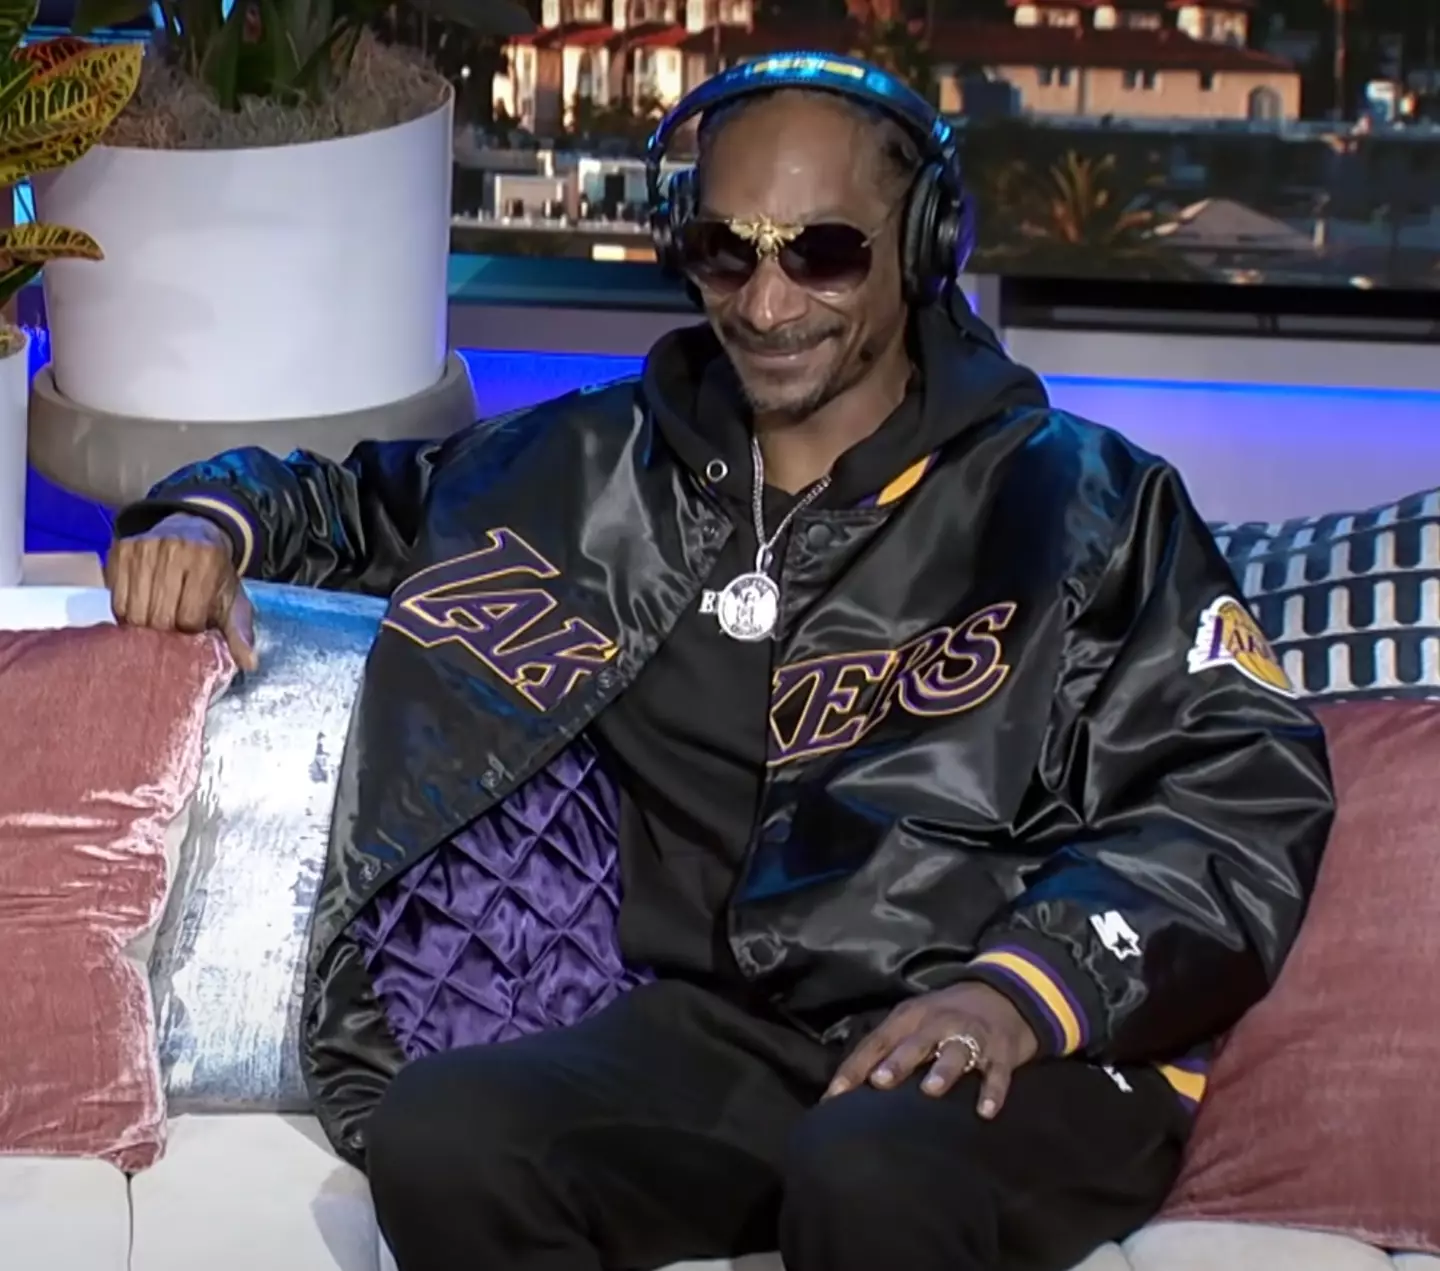 When Snoop speaks about weed, you better listen.